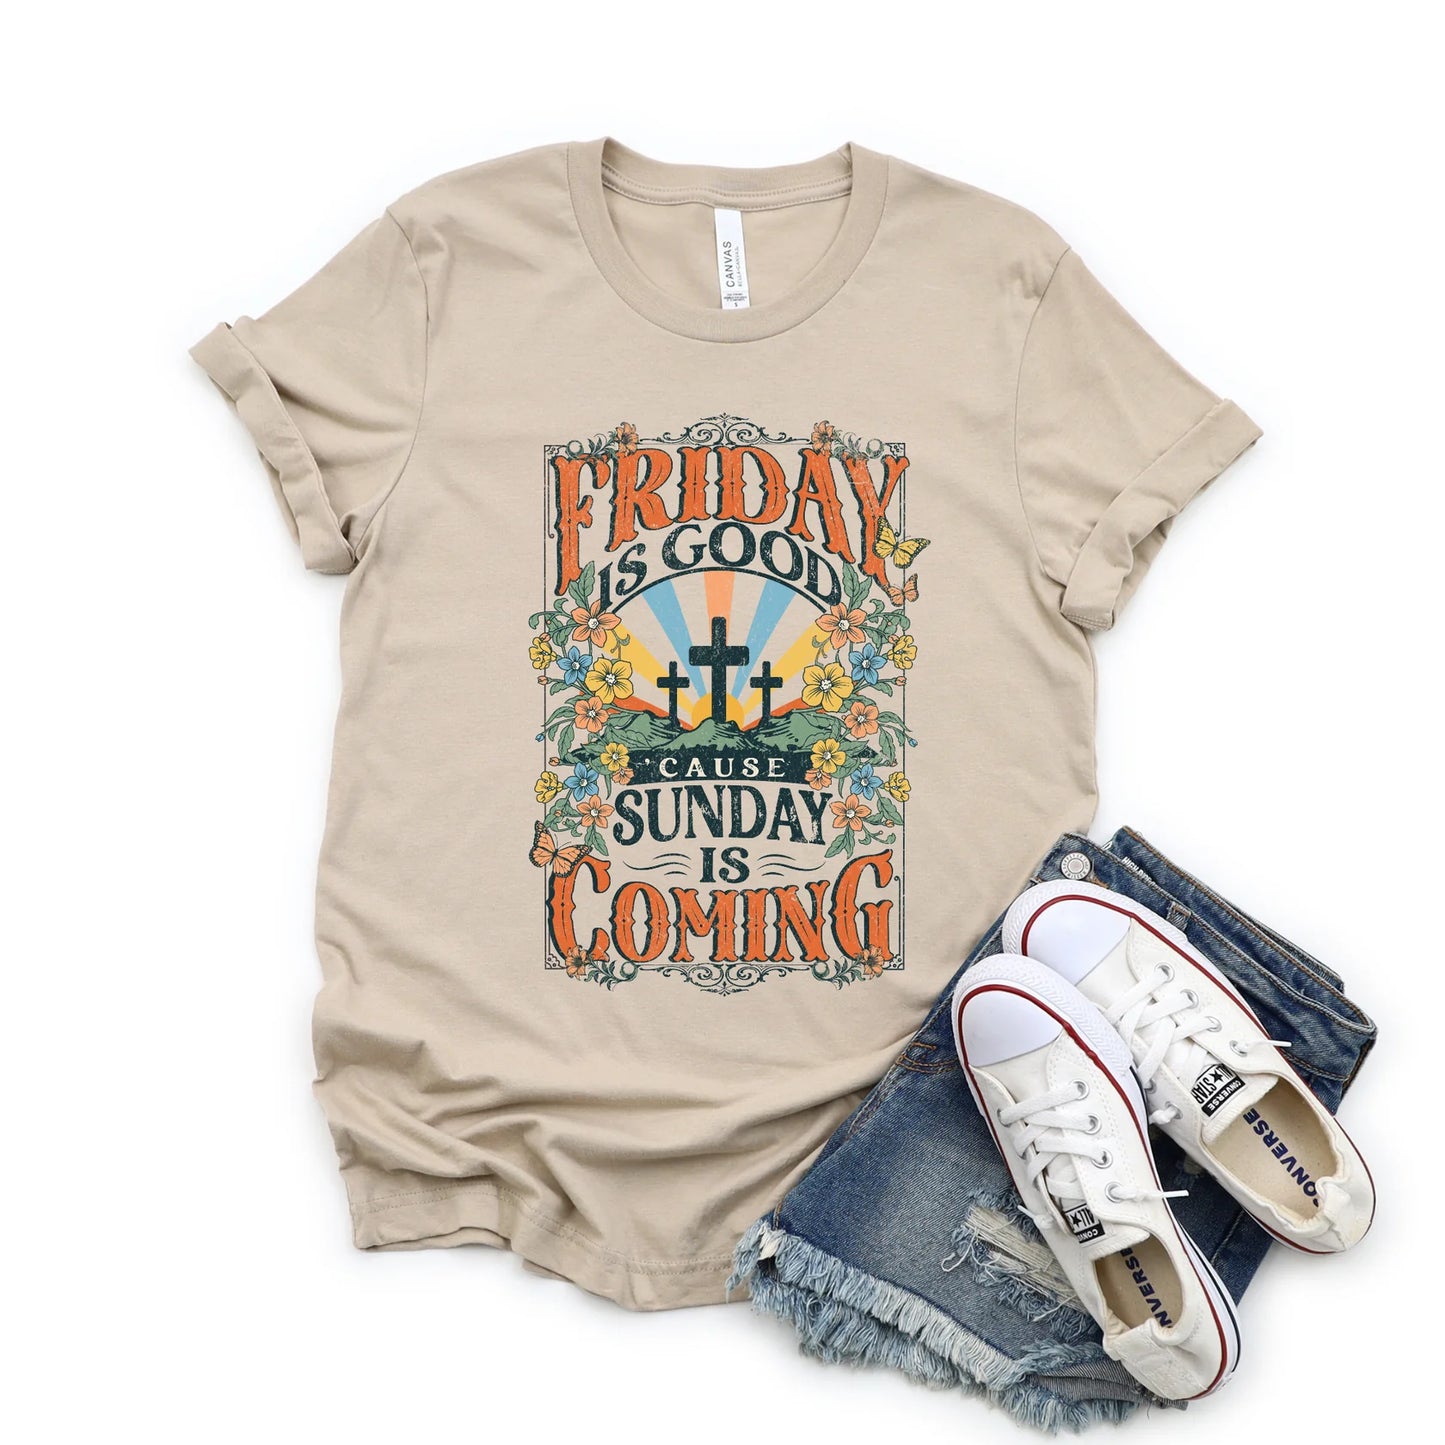 Friday Is Good ‘Cause Sunday Is Coming Graphic Tee or Sweatshirt